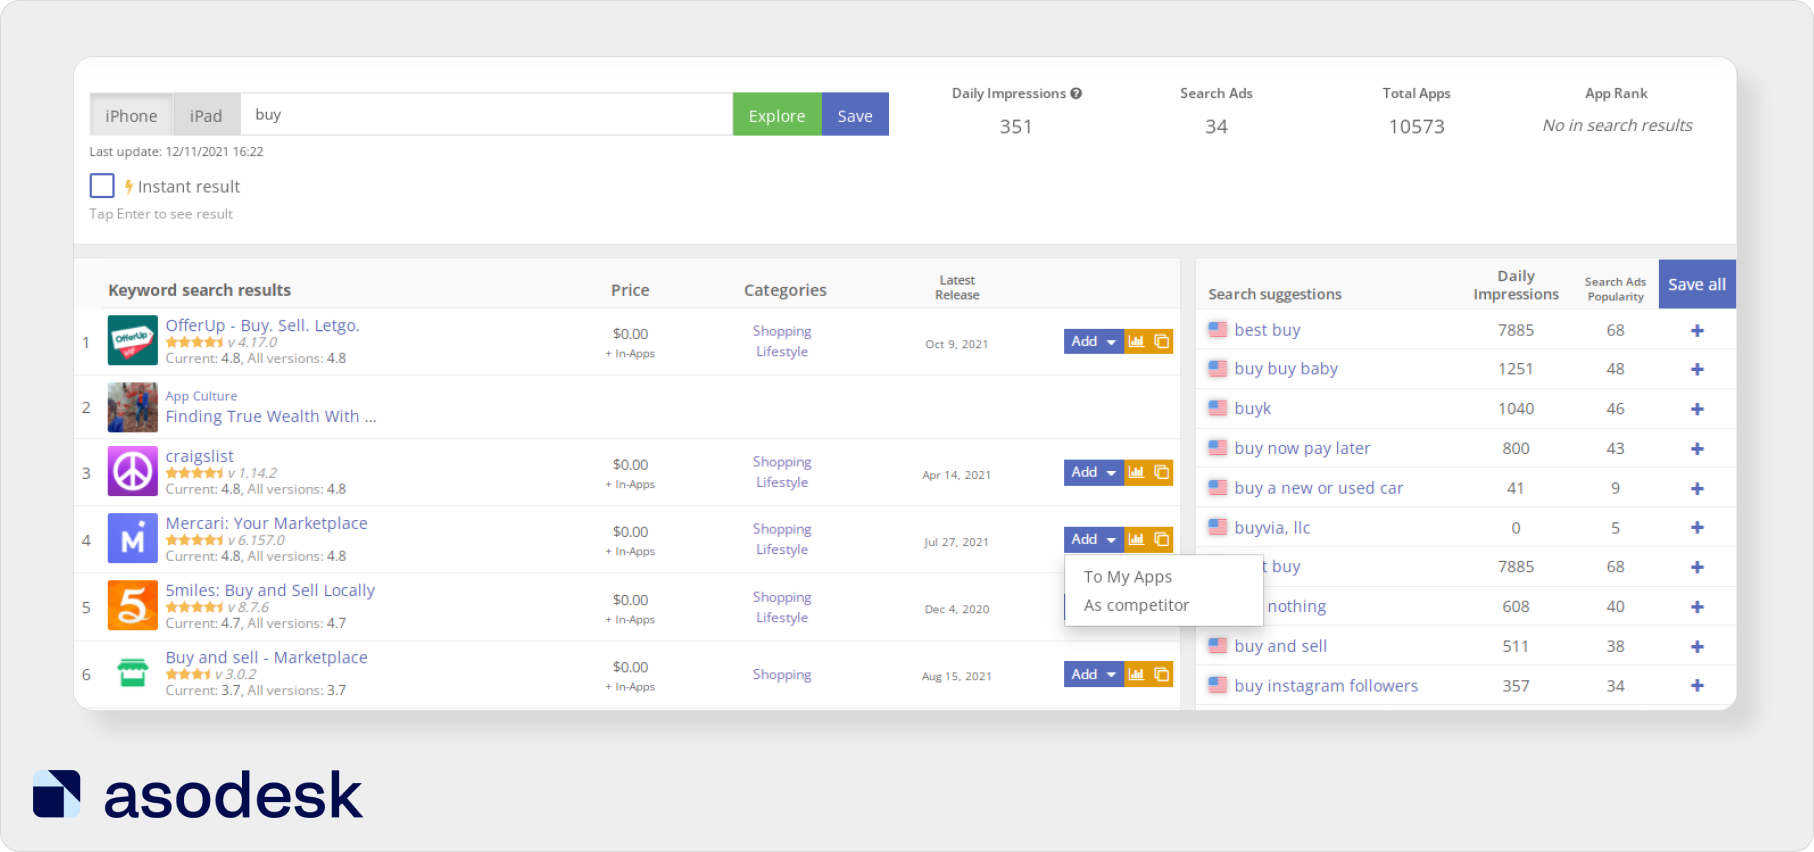 Keyword Explorer tool in Asodesk allows you to analyze search results for queries from App Store and Google Play